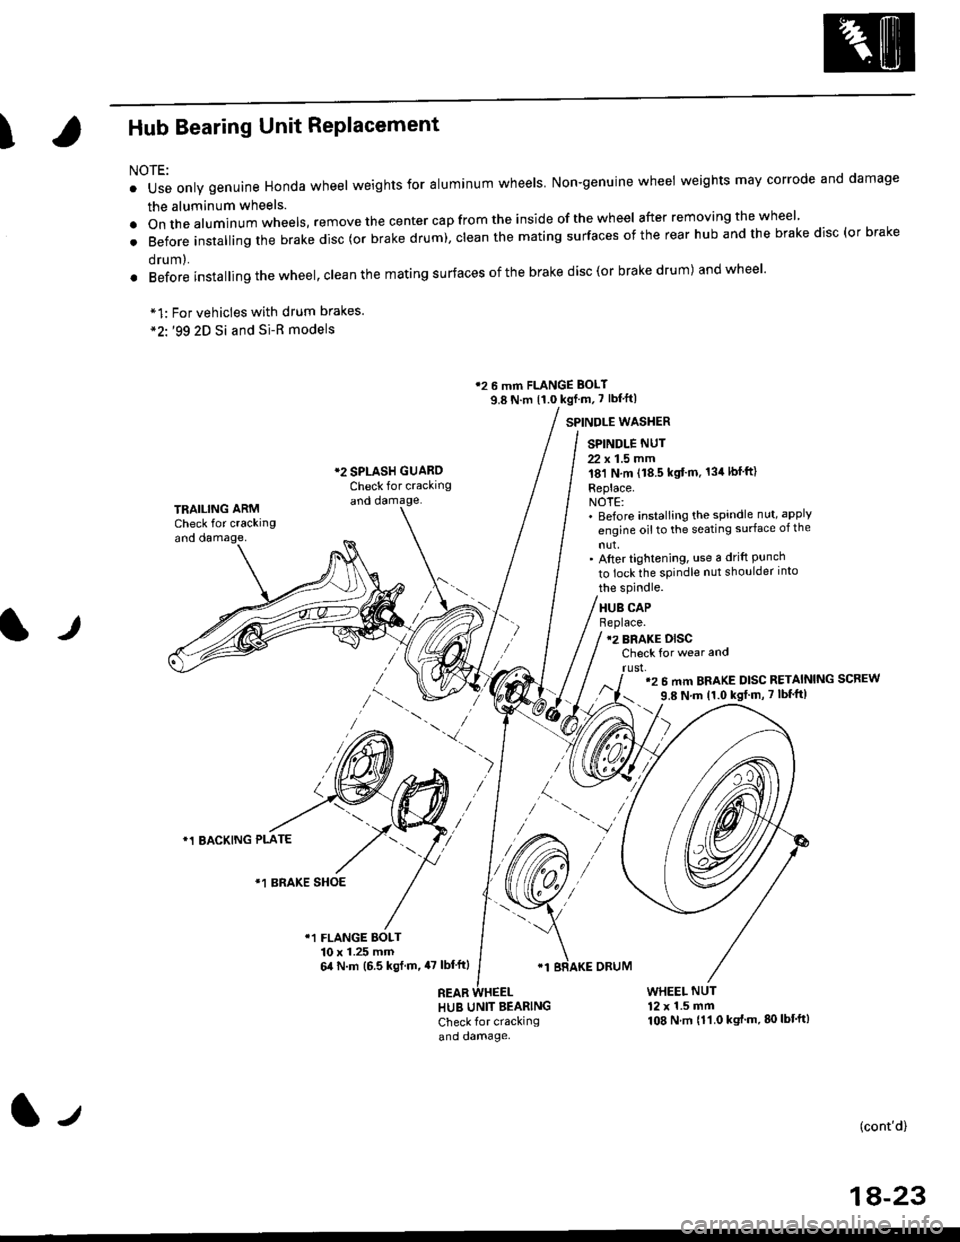 HONDA CIVIC 1996 6.G Owners Guide IHub Bearing Unit RePlacement
For vehicles with drum brakes.99 2D Si and Si-B models
NOTE:
o Use only genuine Honda wheel weights for aluminum wheels Non-genuine wheel weights may corrode and damage
